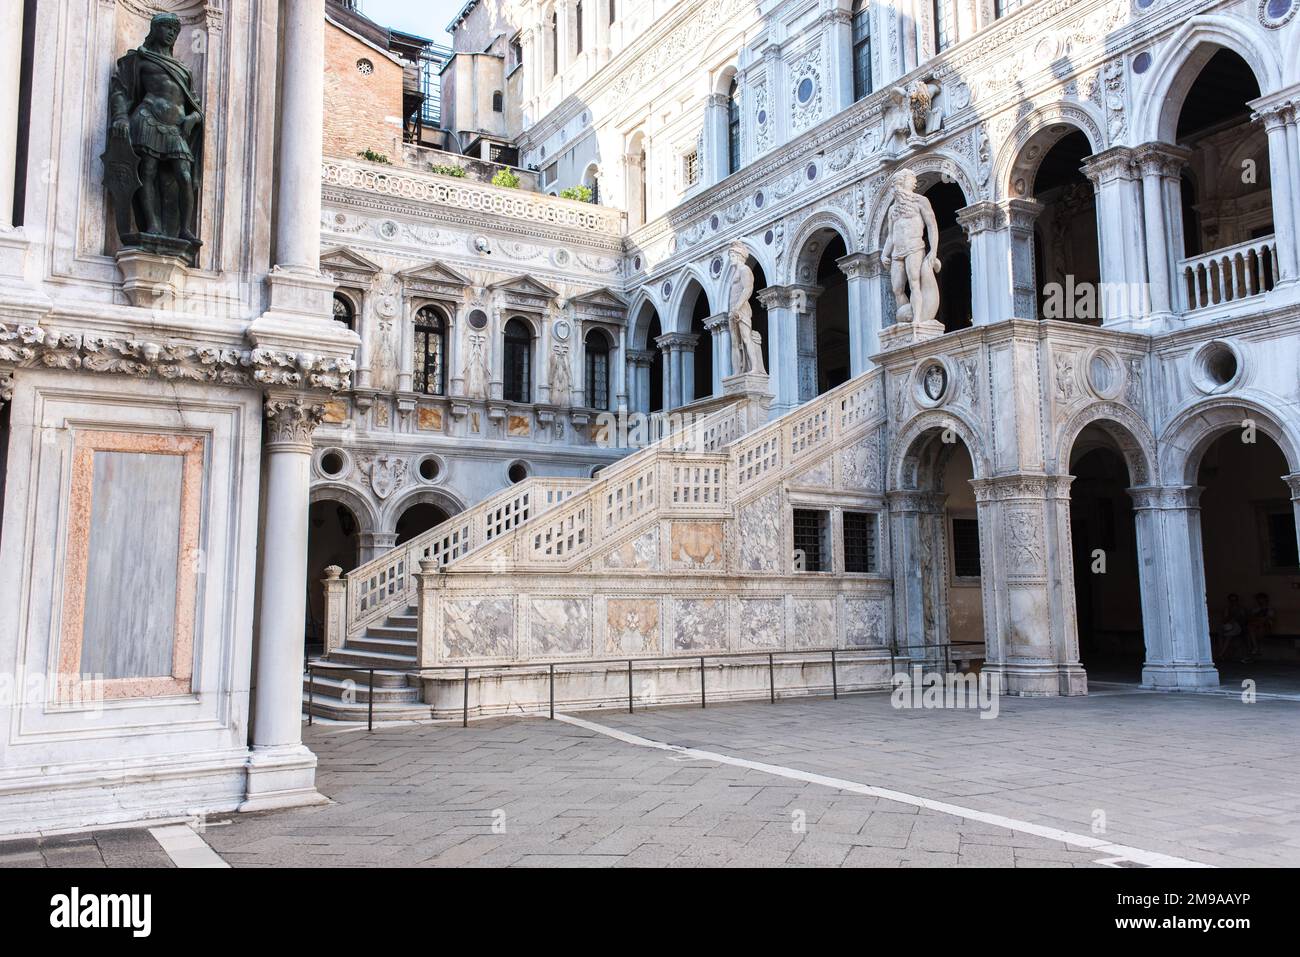 The ancient Doge's Palace of Venice in Italy Stock Photo